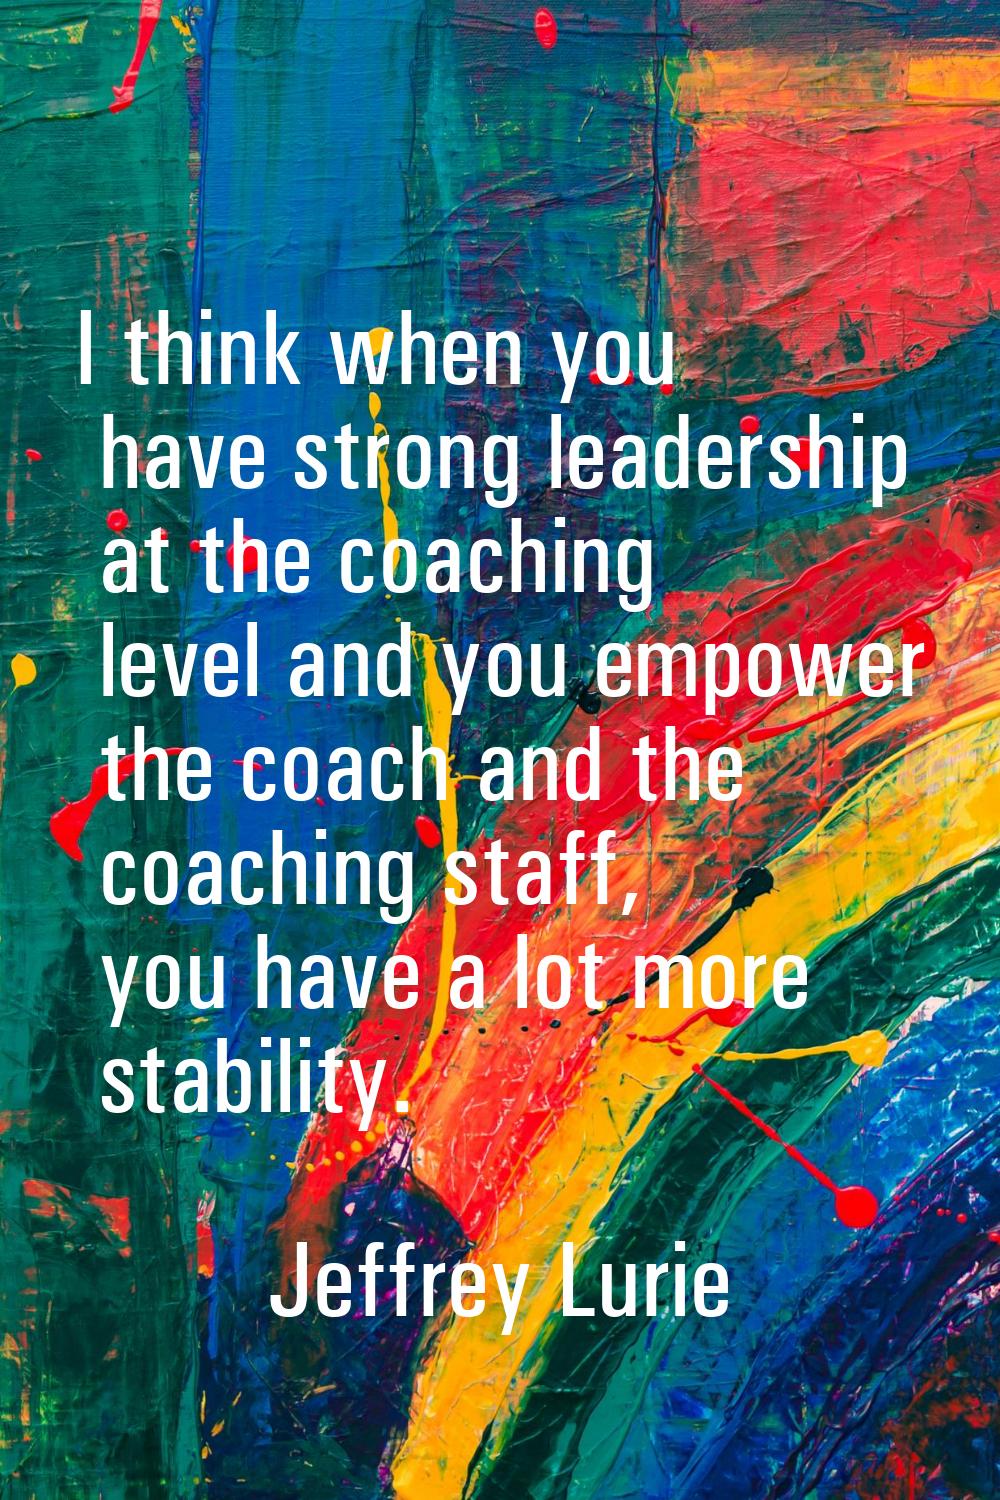 I think when you have strong leadership at the coaching level and you empower the coach and the coa